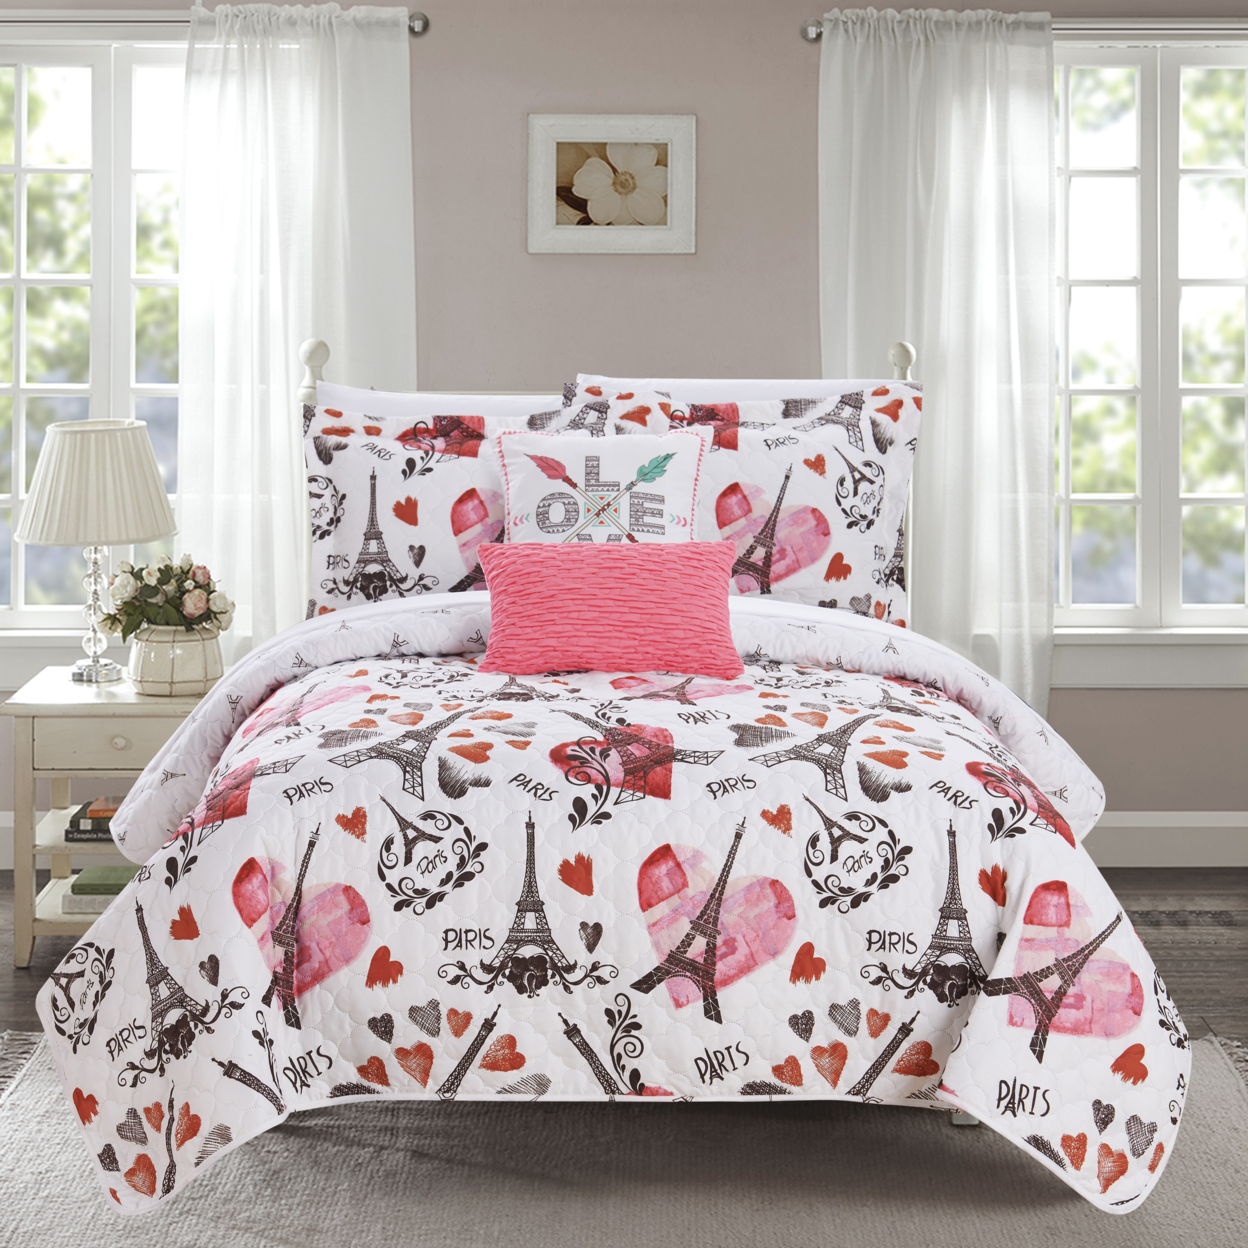 Alphonse 5 Or 4 Piece Reversible Quilt Set Paris Is Love Inspired Printed Design Coverlet Bedding - Pink, Queen